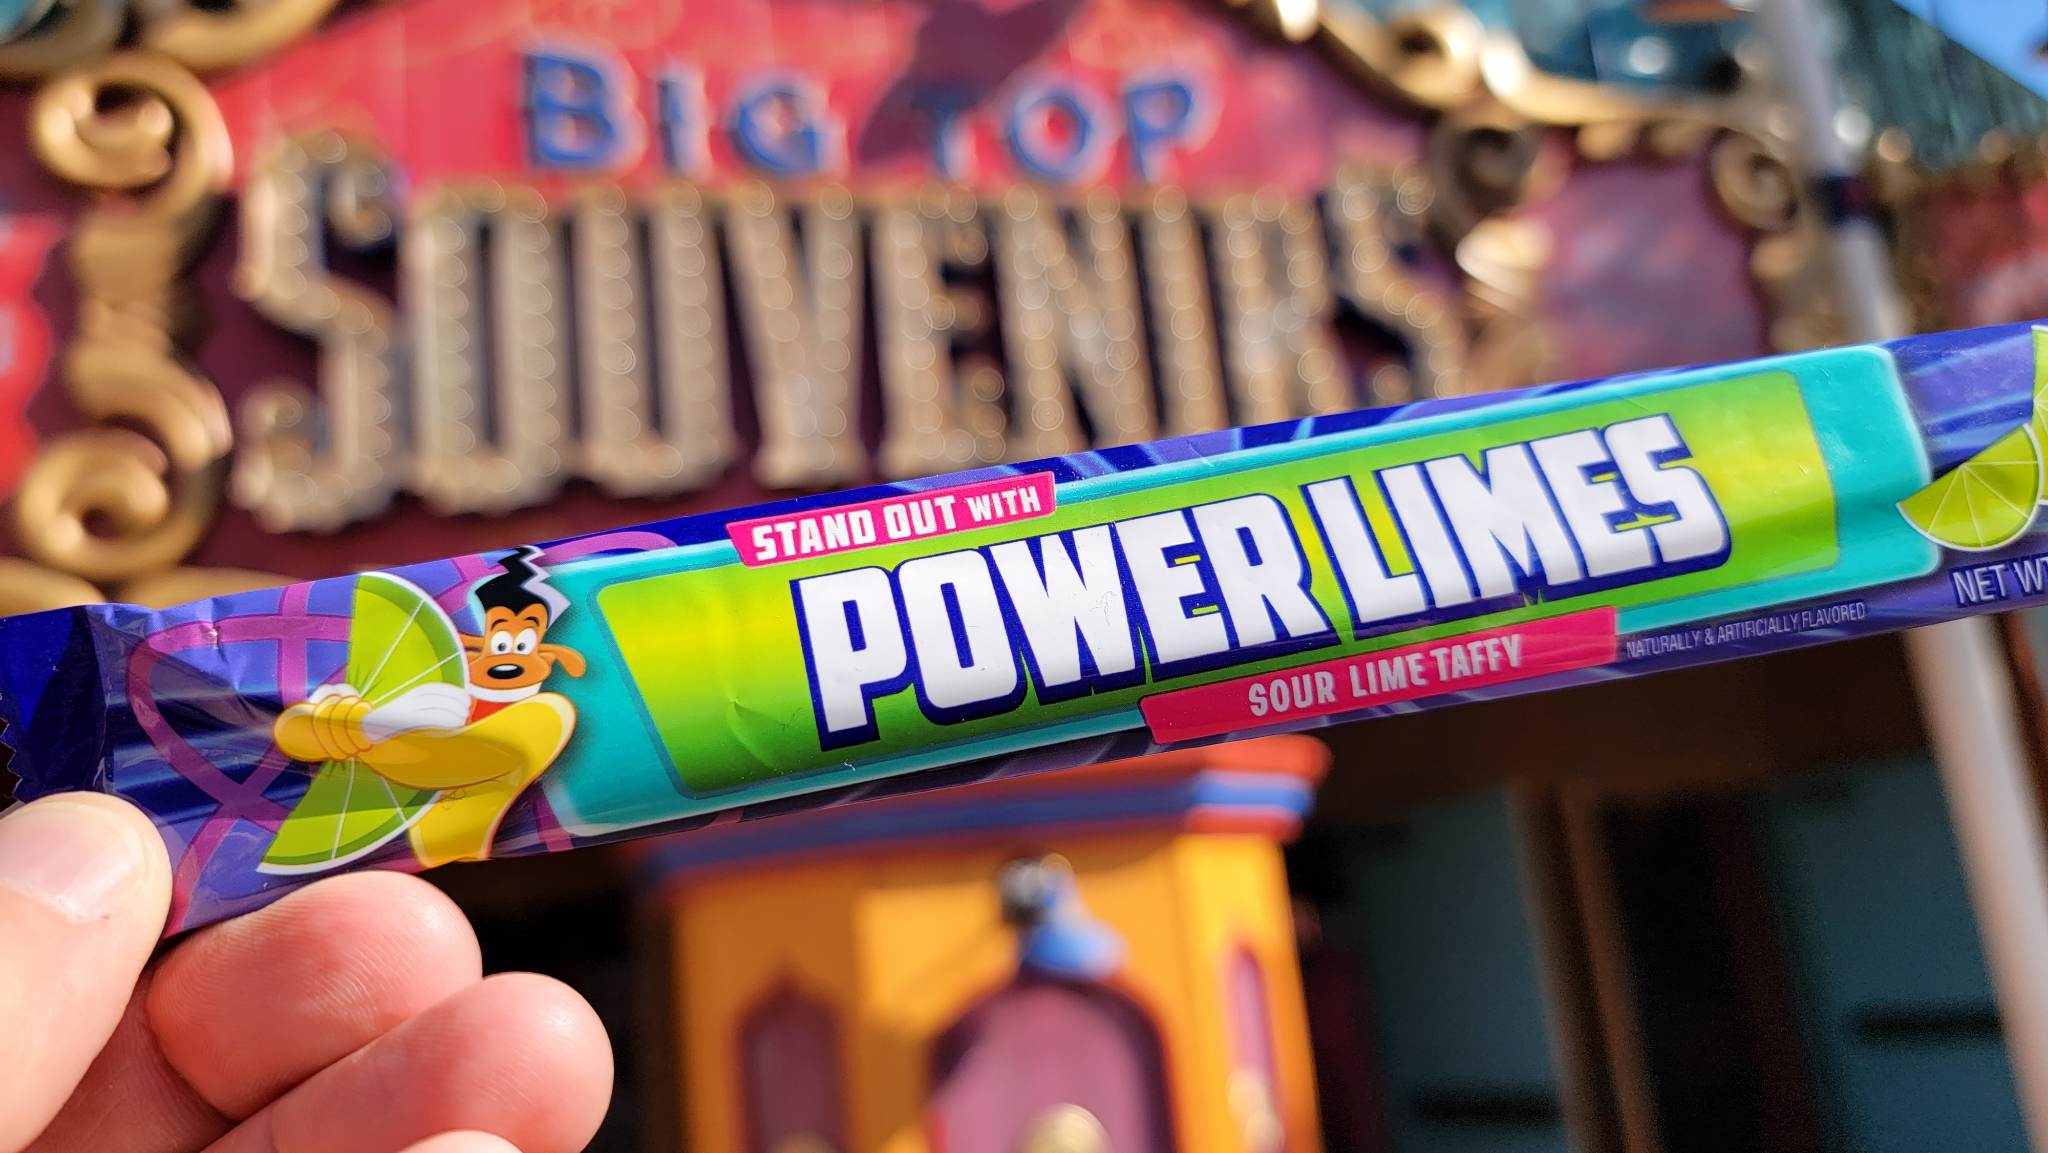 The Internet is going CRAZY over NEW Power Limes Candy at Disney World!